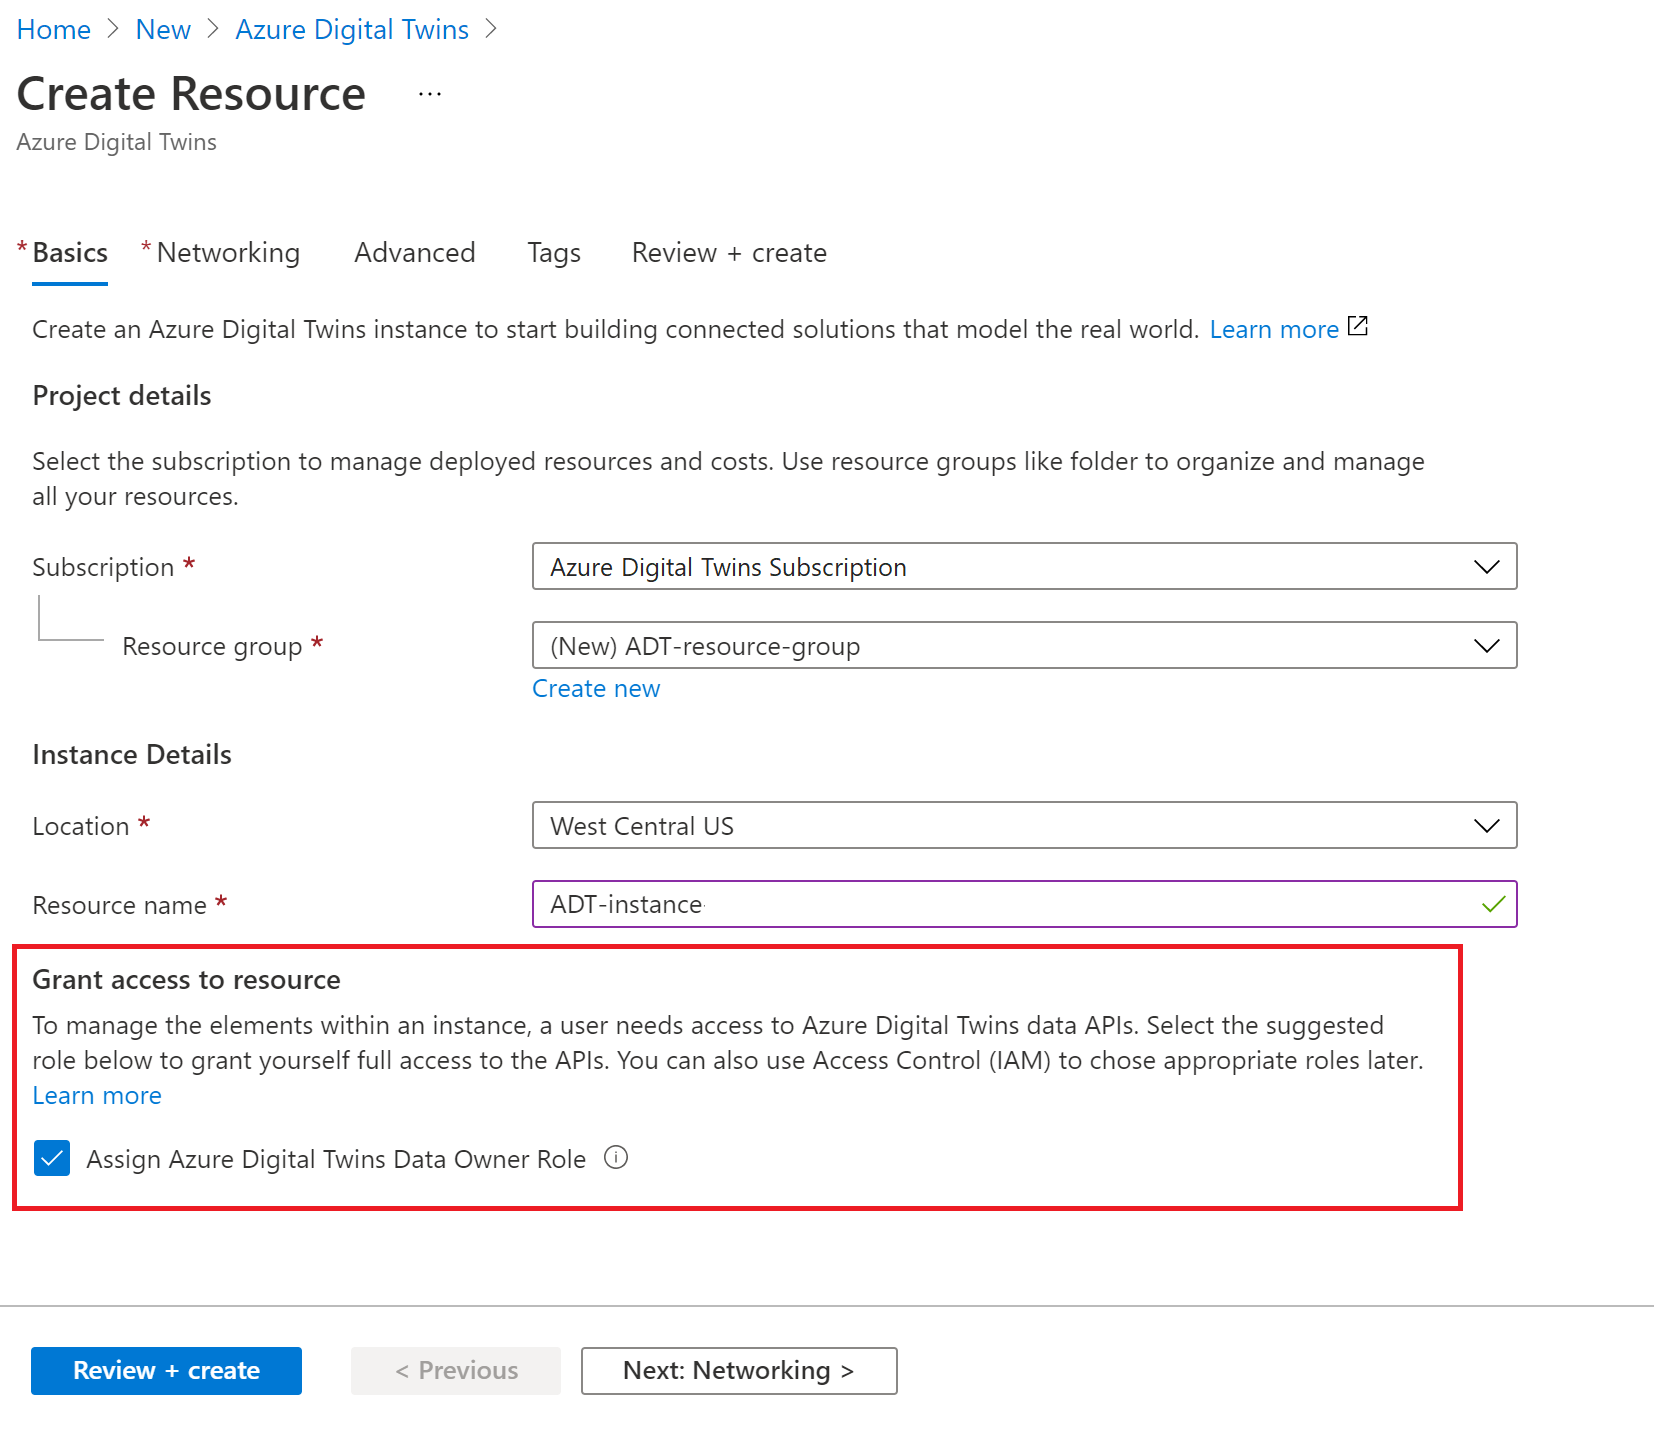 Screenshot of the Create Resource process for Azure Digital Twins in the Azure portal. The checkbox under Grant access to resource is highlighted.